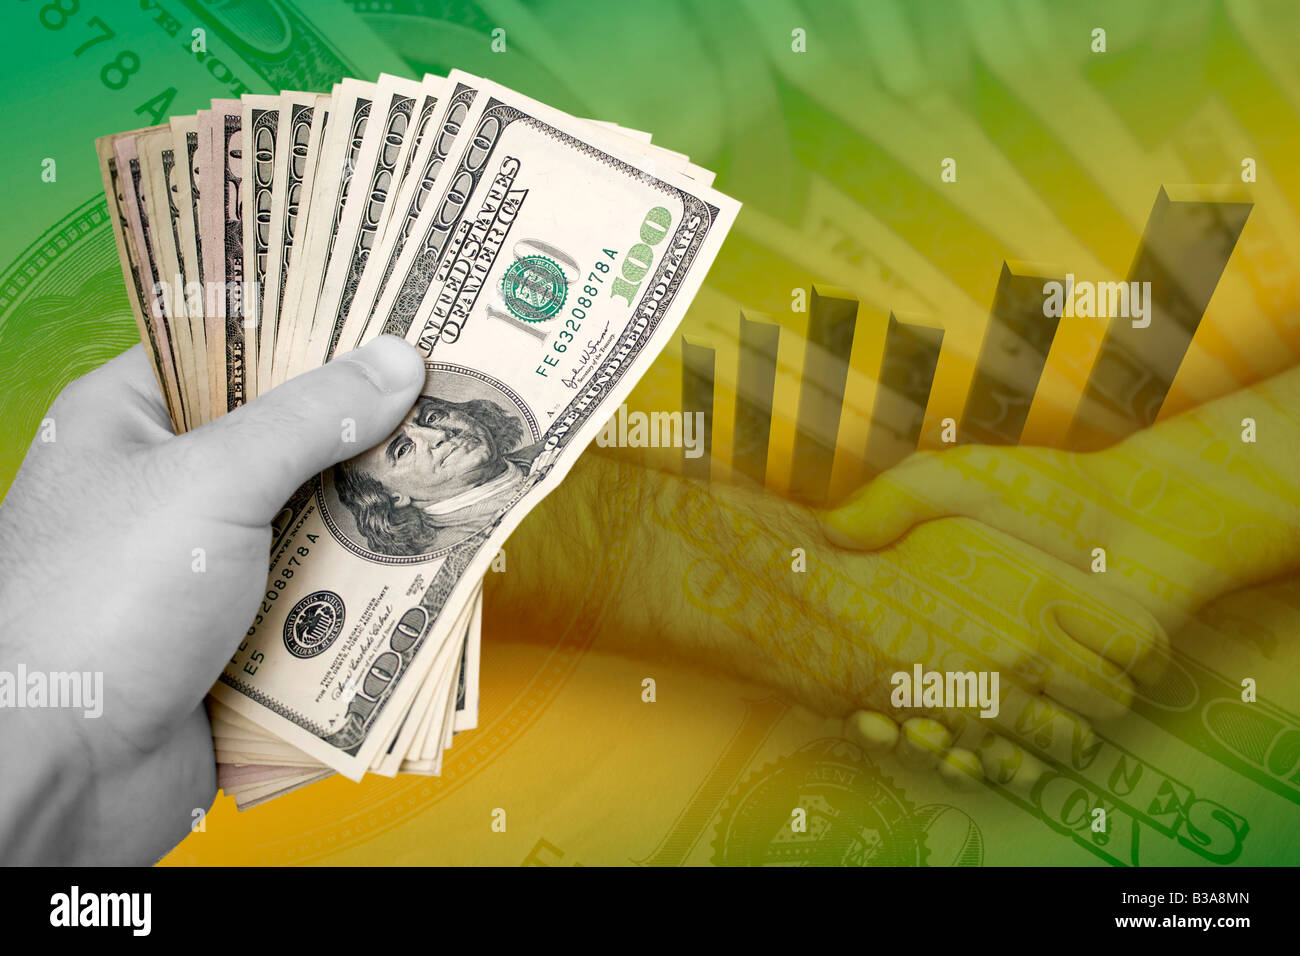 Handful of cash profit chart and a firm handshake A great image to denote profits or successful business dealings Stock Photo